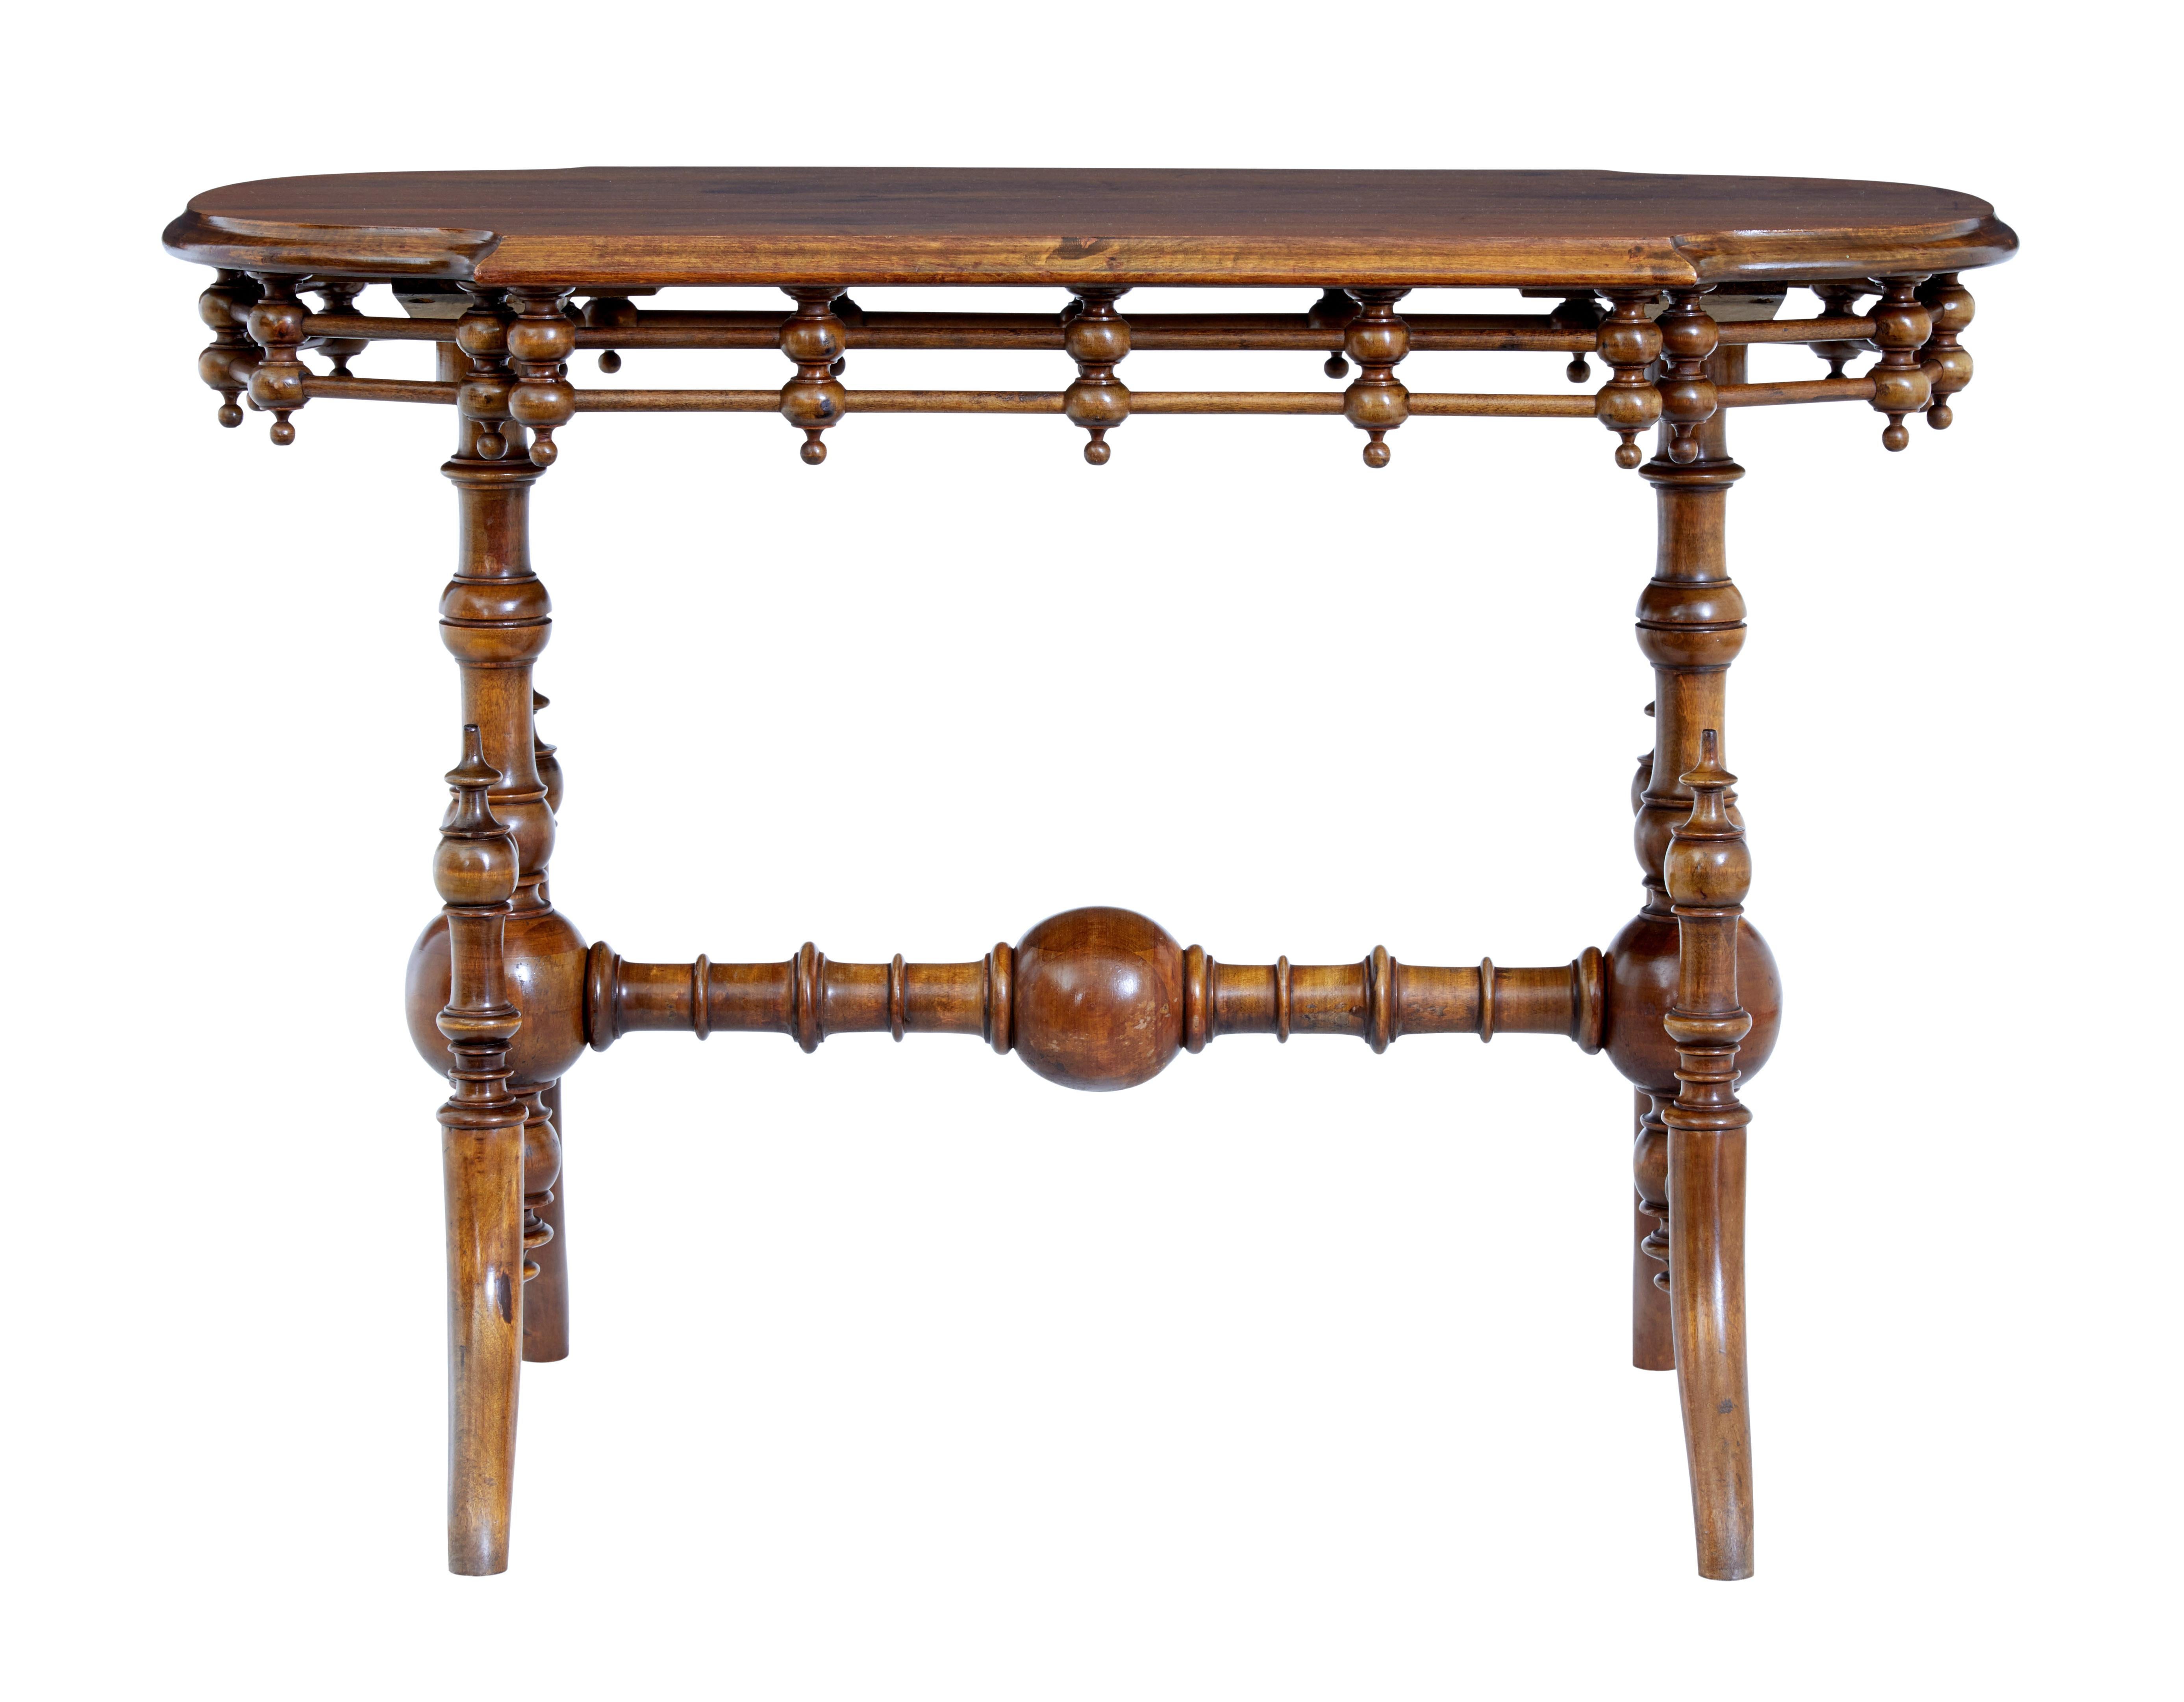 19th century aesthetic movement walnut table circa 1890.

Beautiful shaped and turned aesthetic movement inspired side/hall table.

Shaped walnut top with an applied freize of turnings and dowels. Supported by 2 turned bulbous columns and splayed